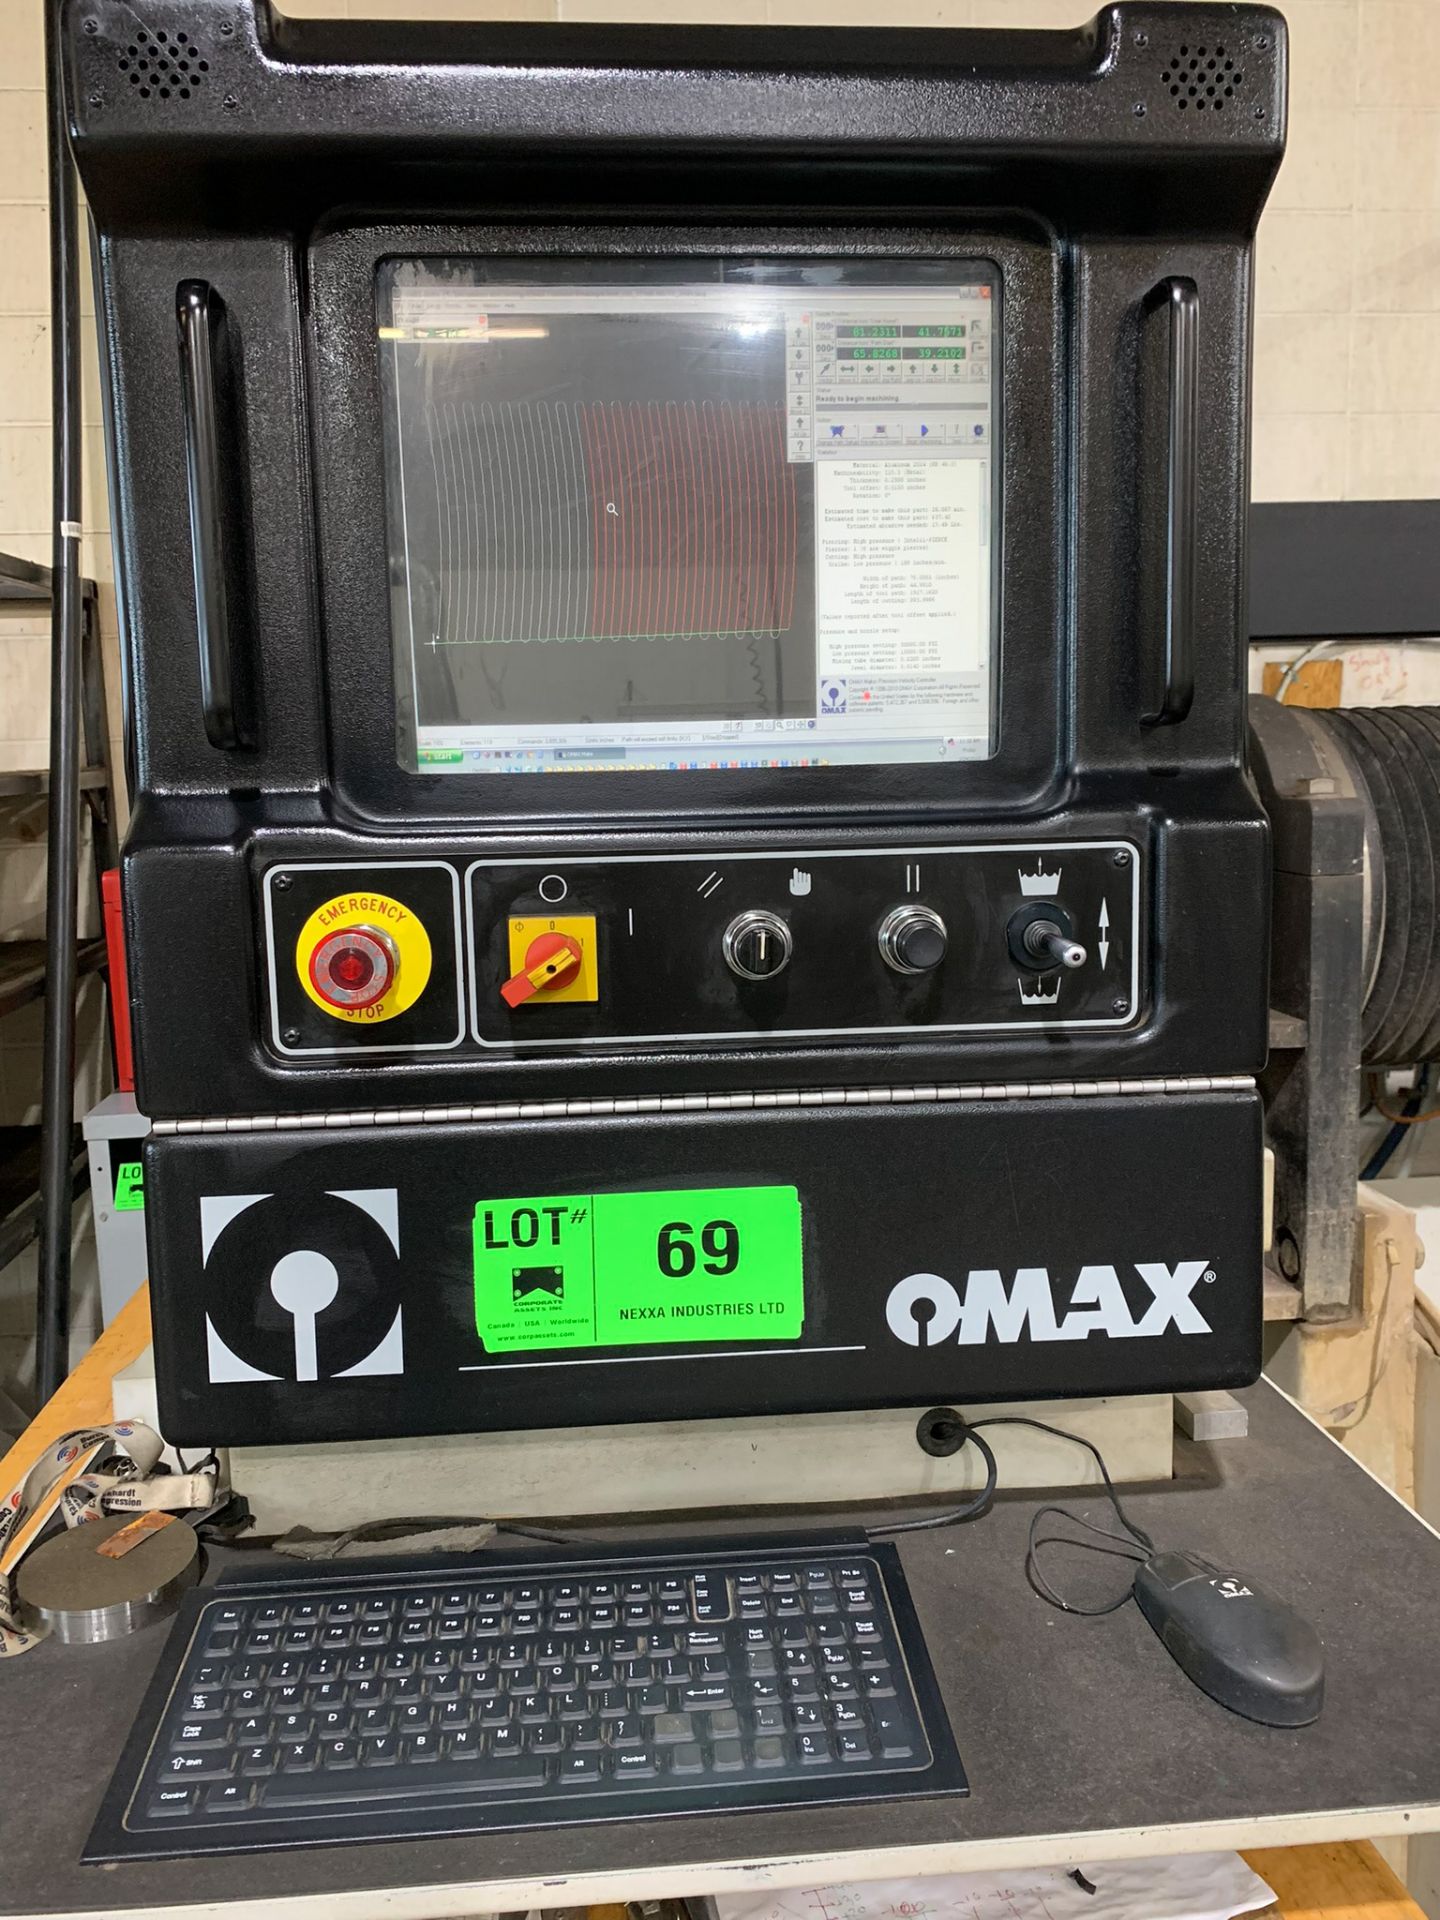 OMAX (2007) 55100 CNC WATERJET CUTTING SYSTEM WITH OMAX WINDOWS PC BASED CNC CONTROL, 55" X 100" - Image 2 of 20